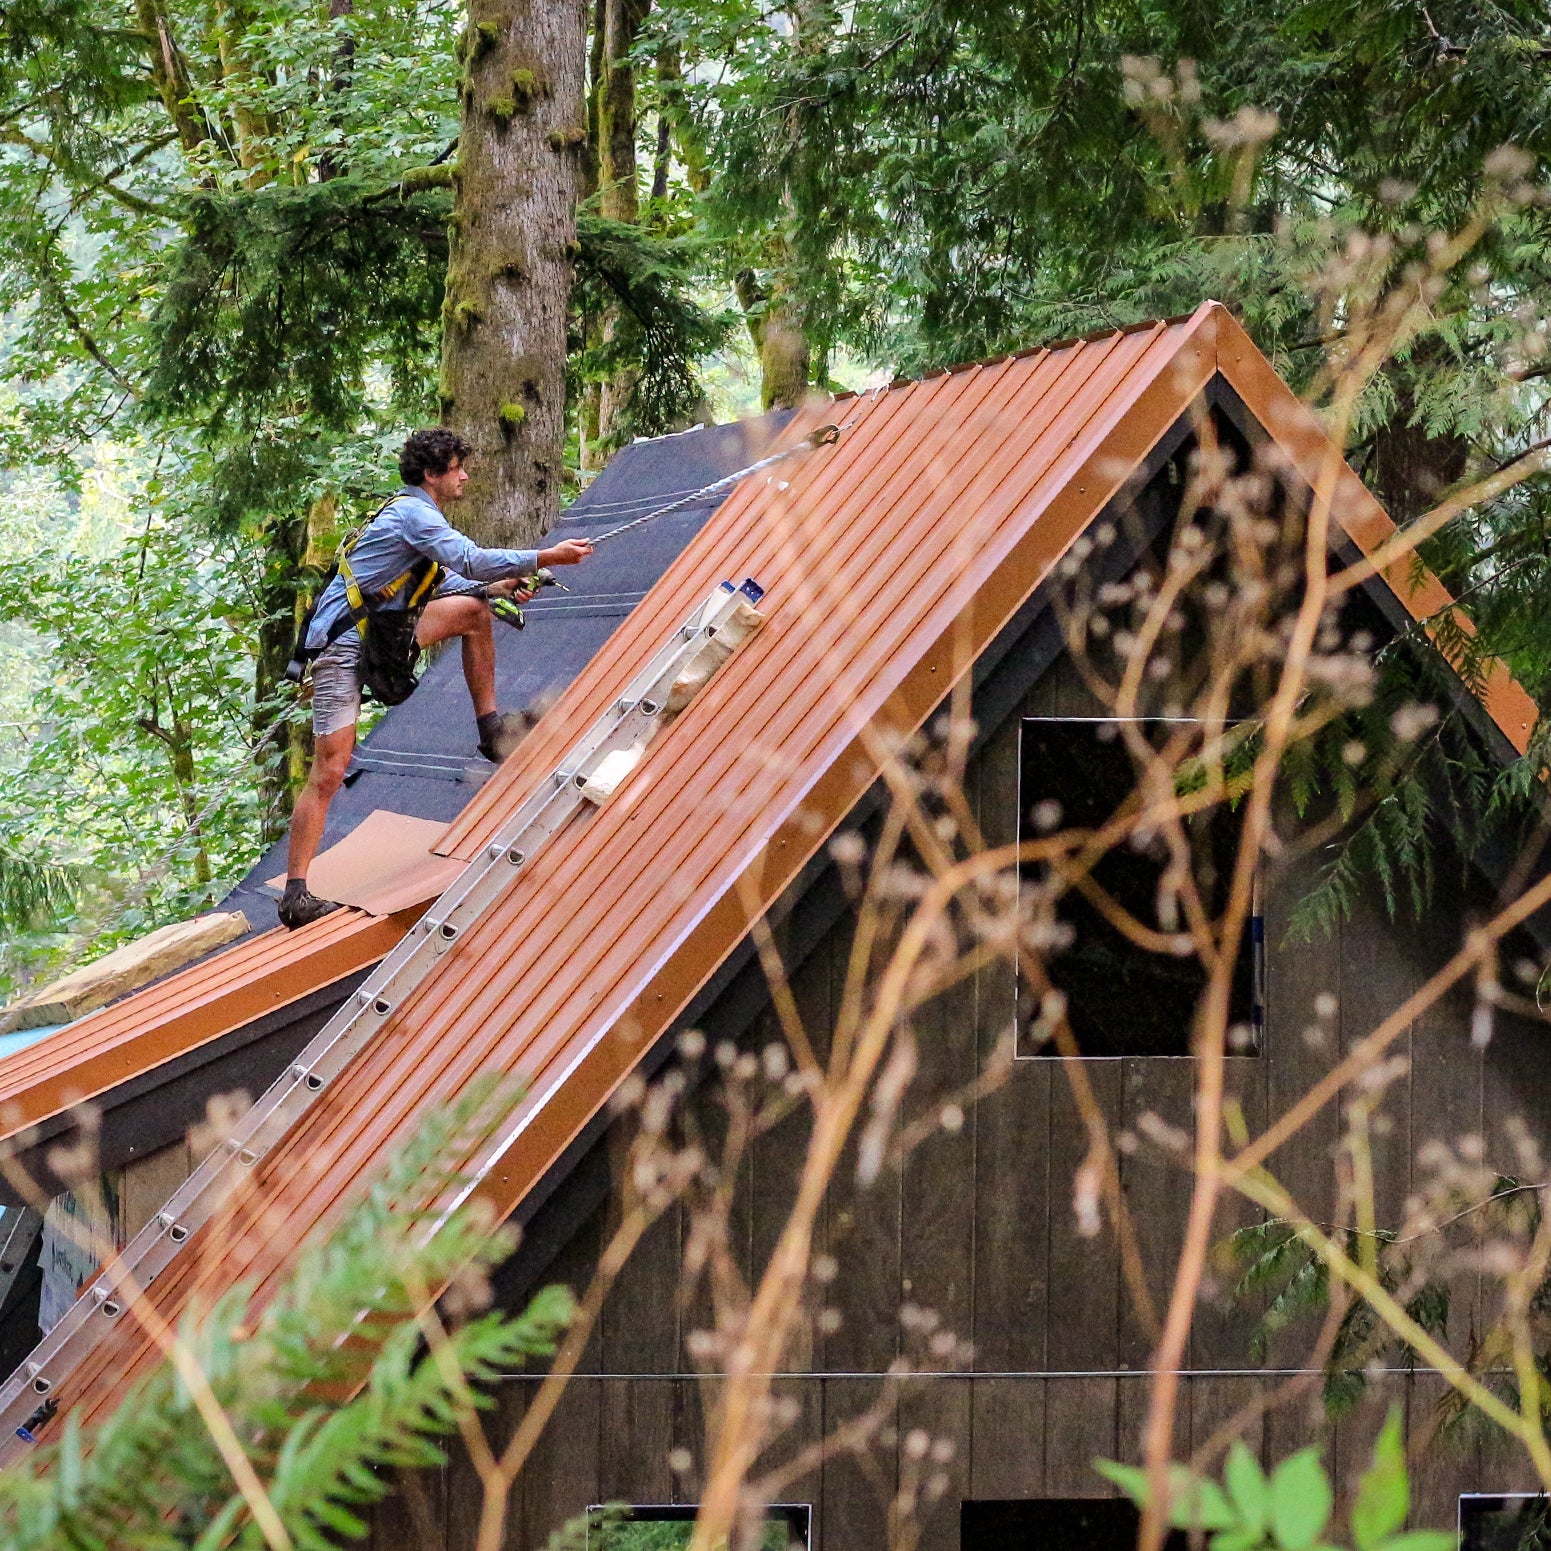 We Quit Our Jobs to Build a Cabin—Everything Went Wrong